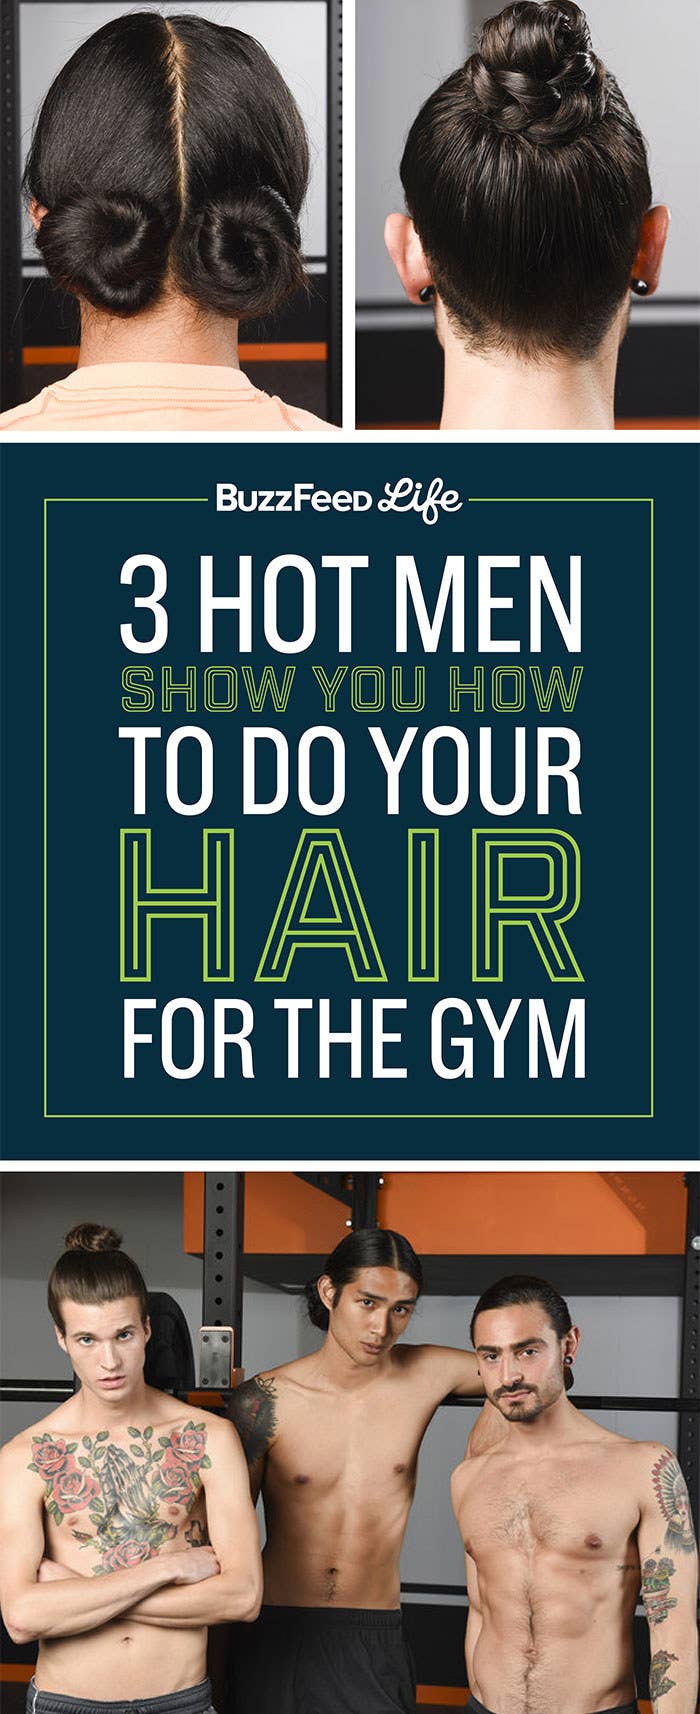 8 Ways To Style Your Hair For The Gym That Are Actually Awesome